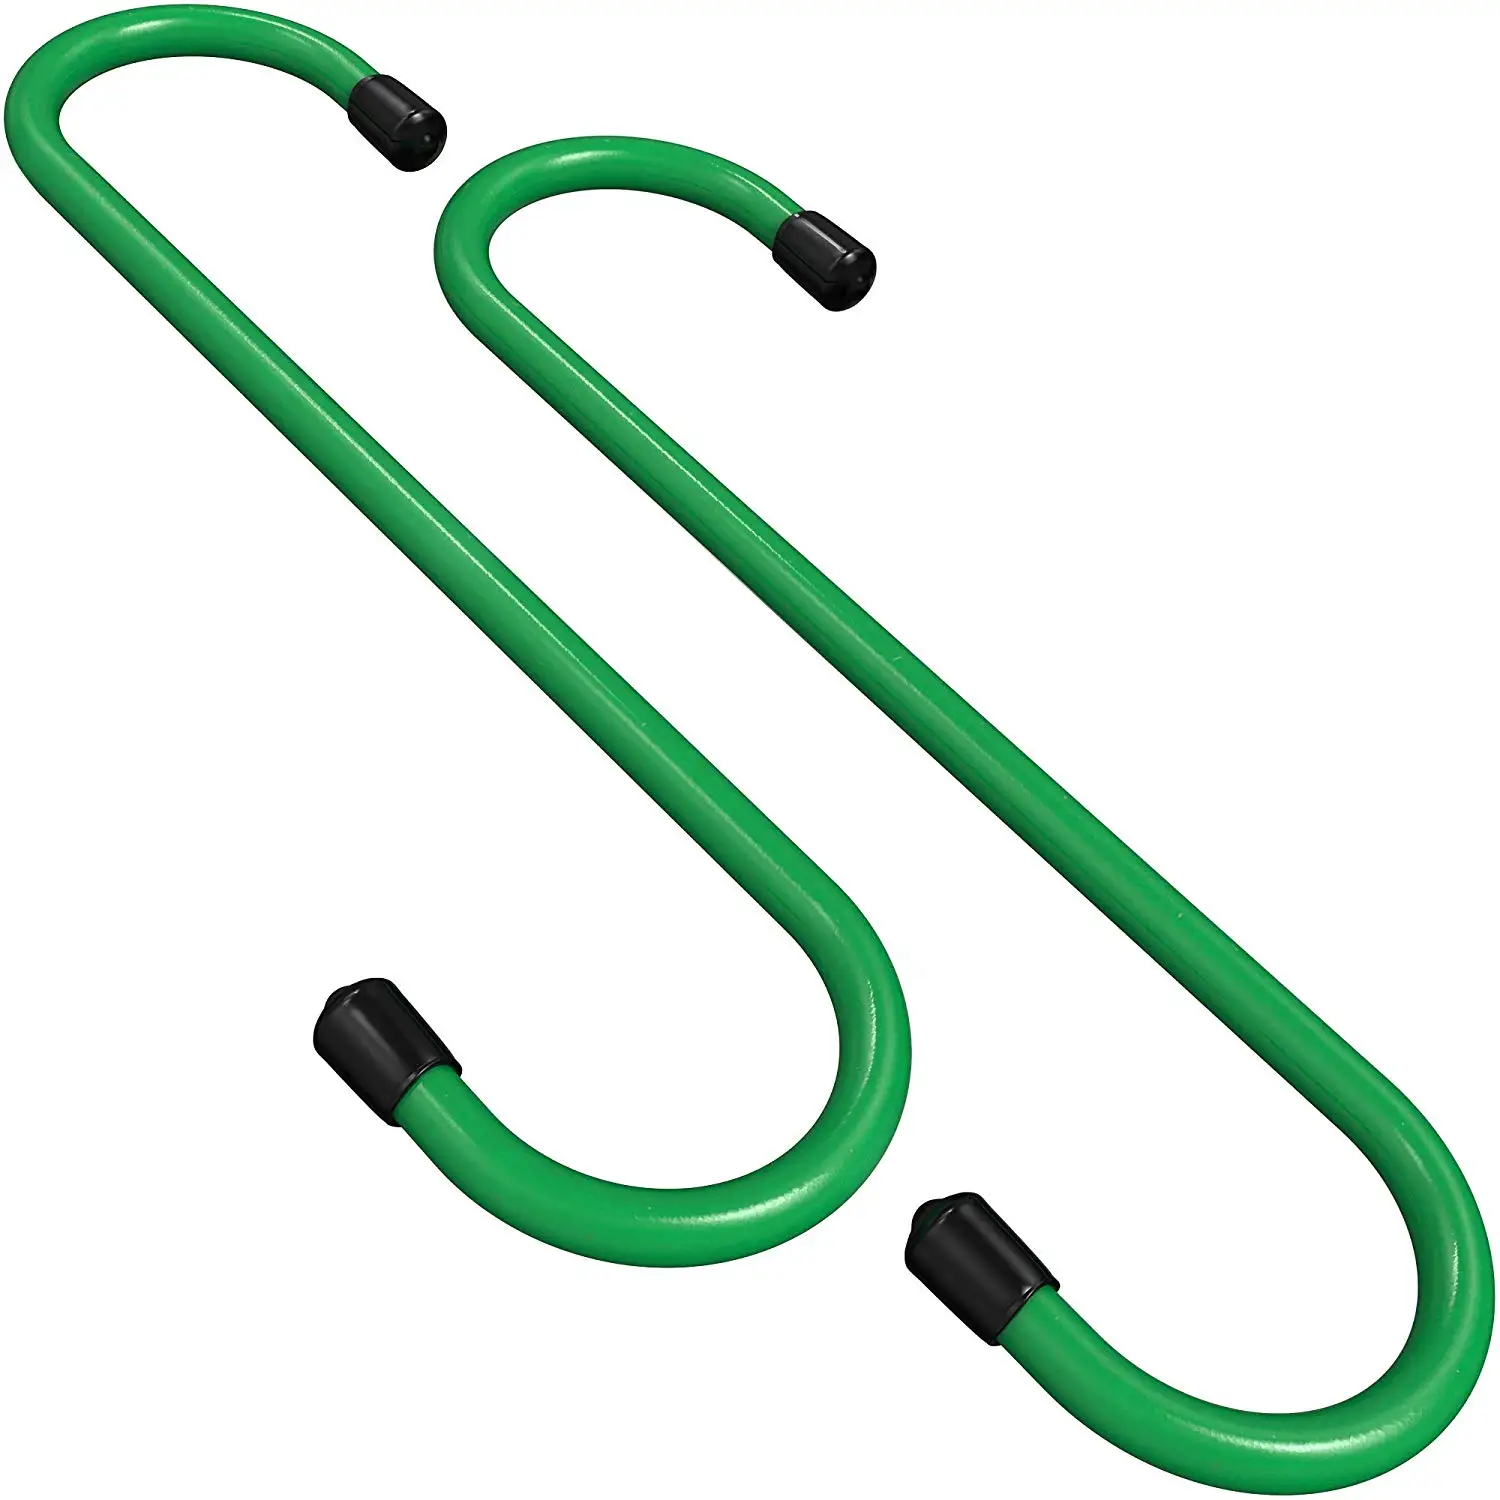 ITEQ Automotive Color Coated Brake Caliper Hanger Hooks with Rubber Tips Set of 2 Green 